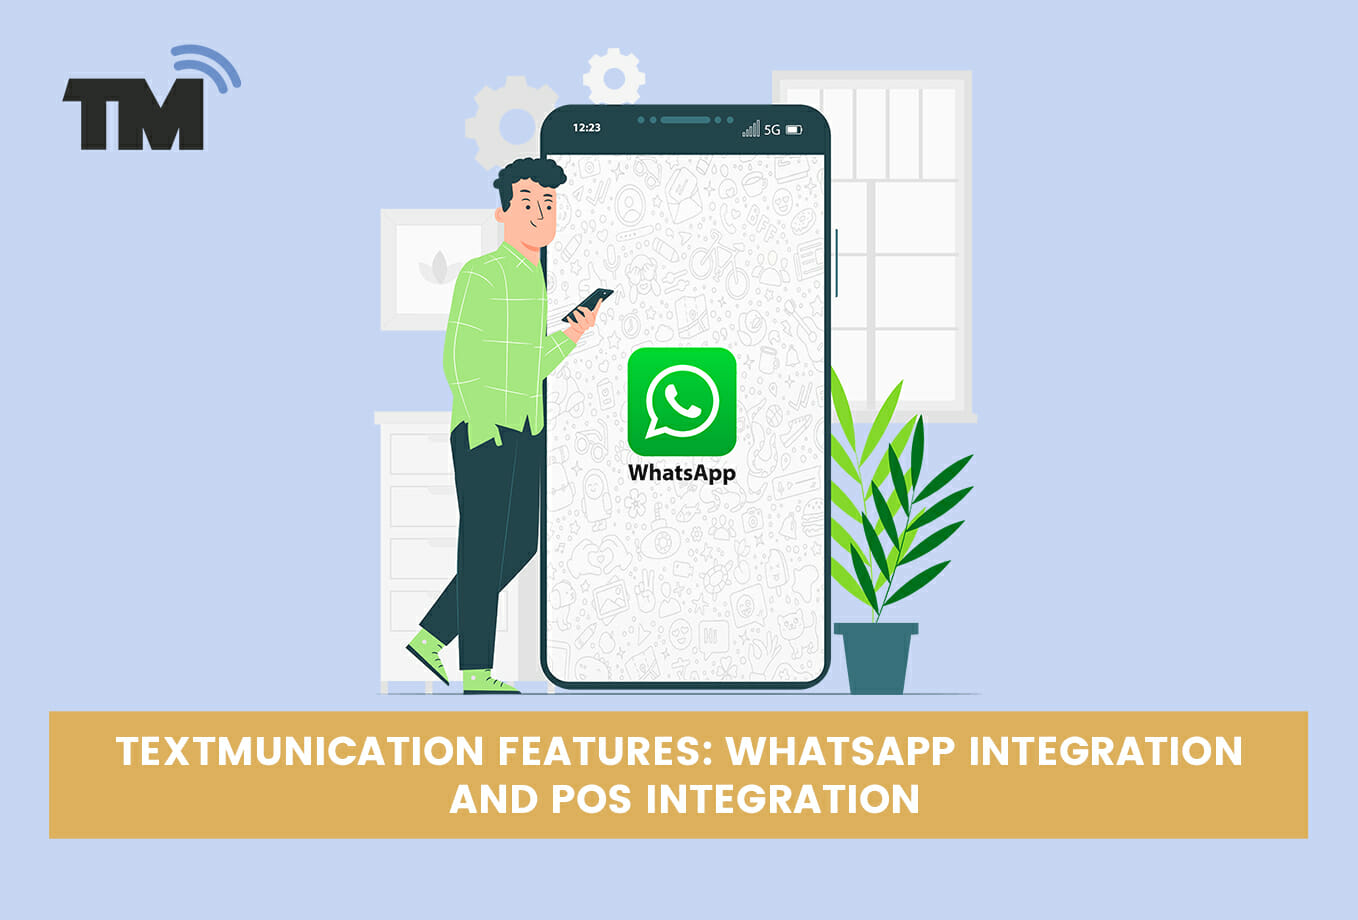 Textmunication Features: WhatsApp Integration and PoS Integration